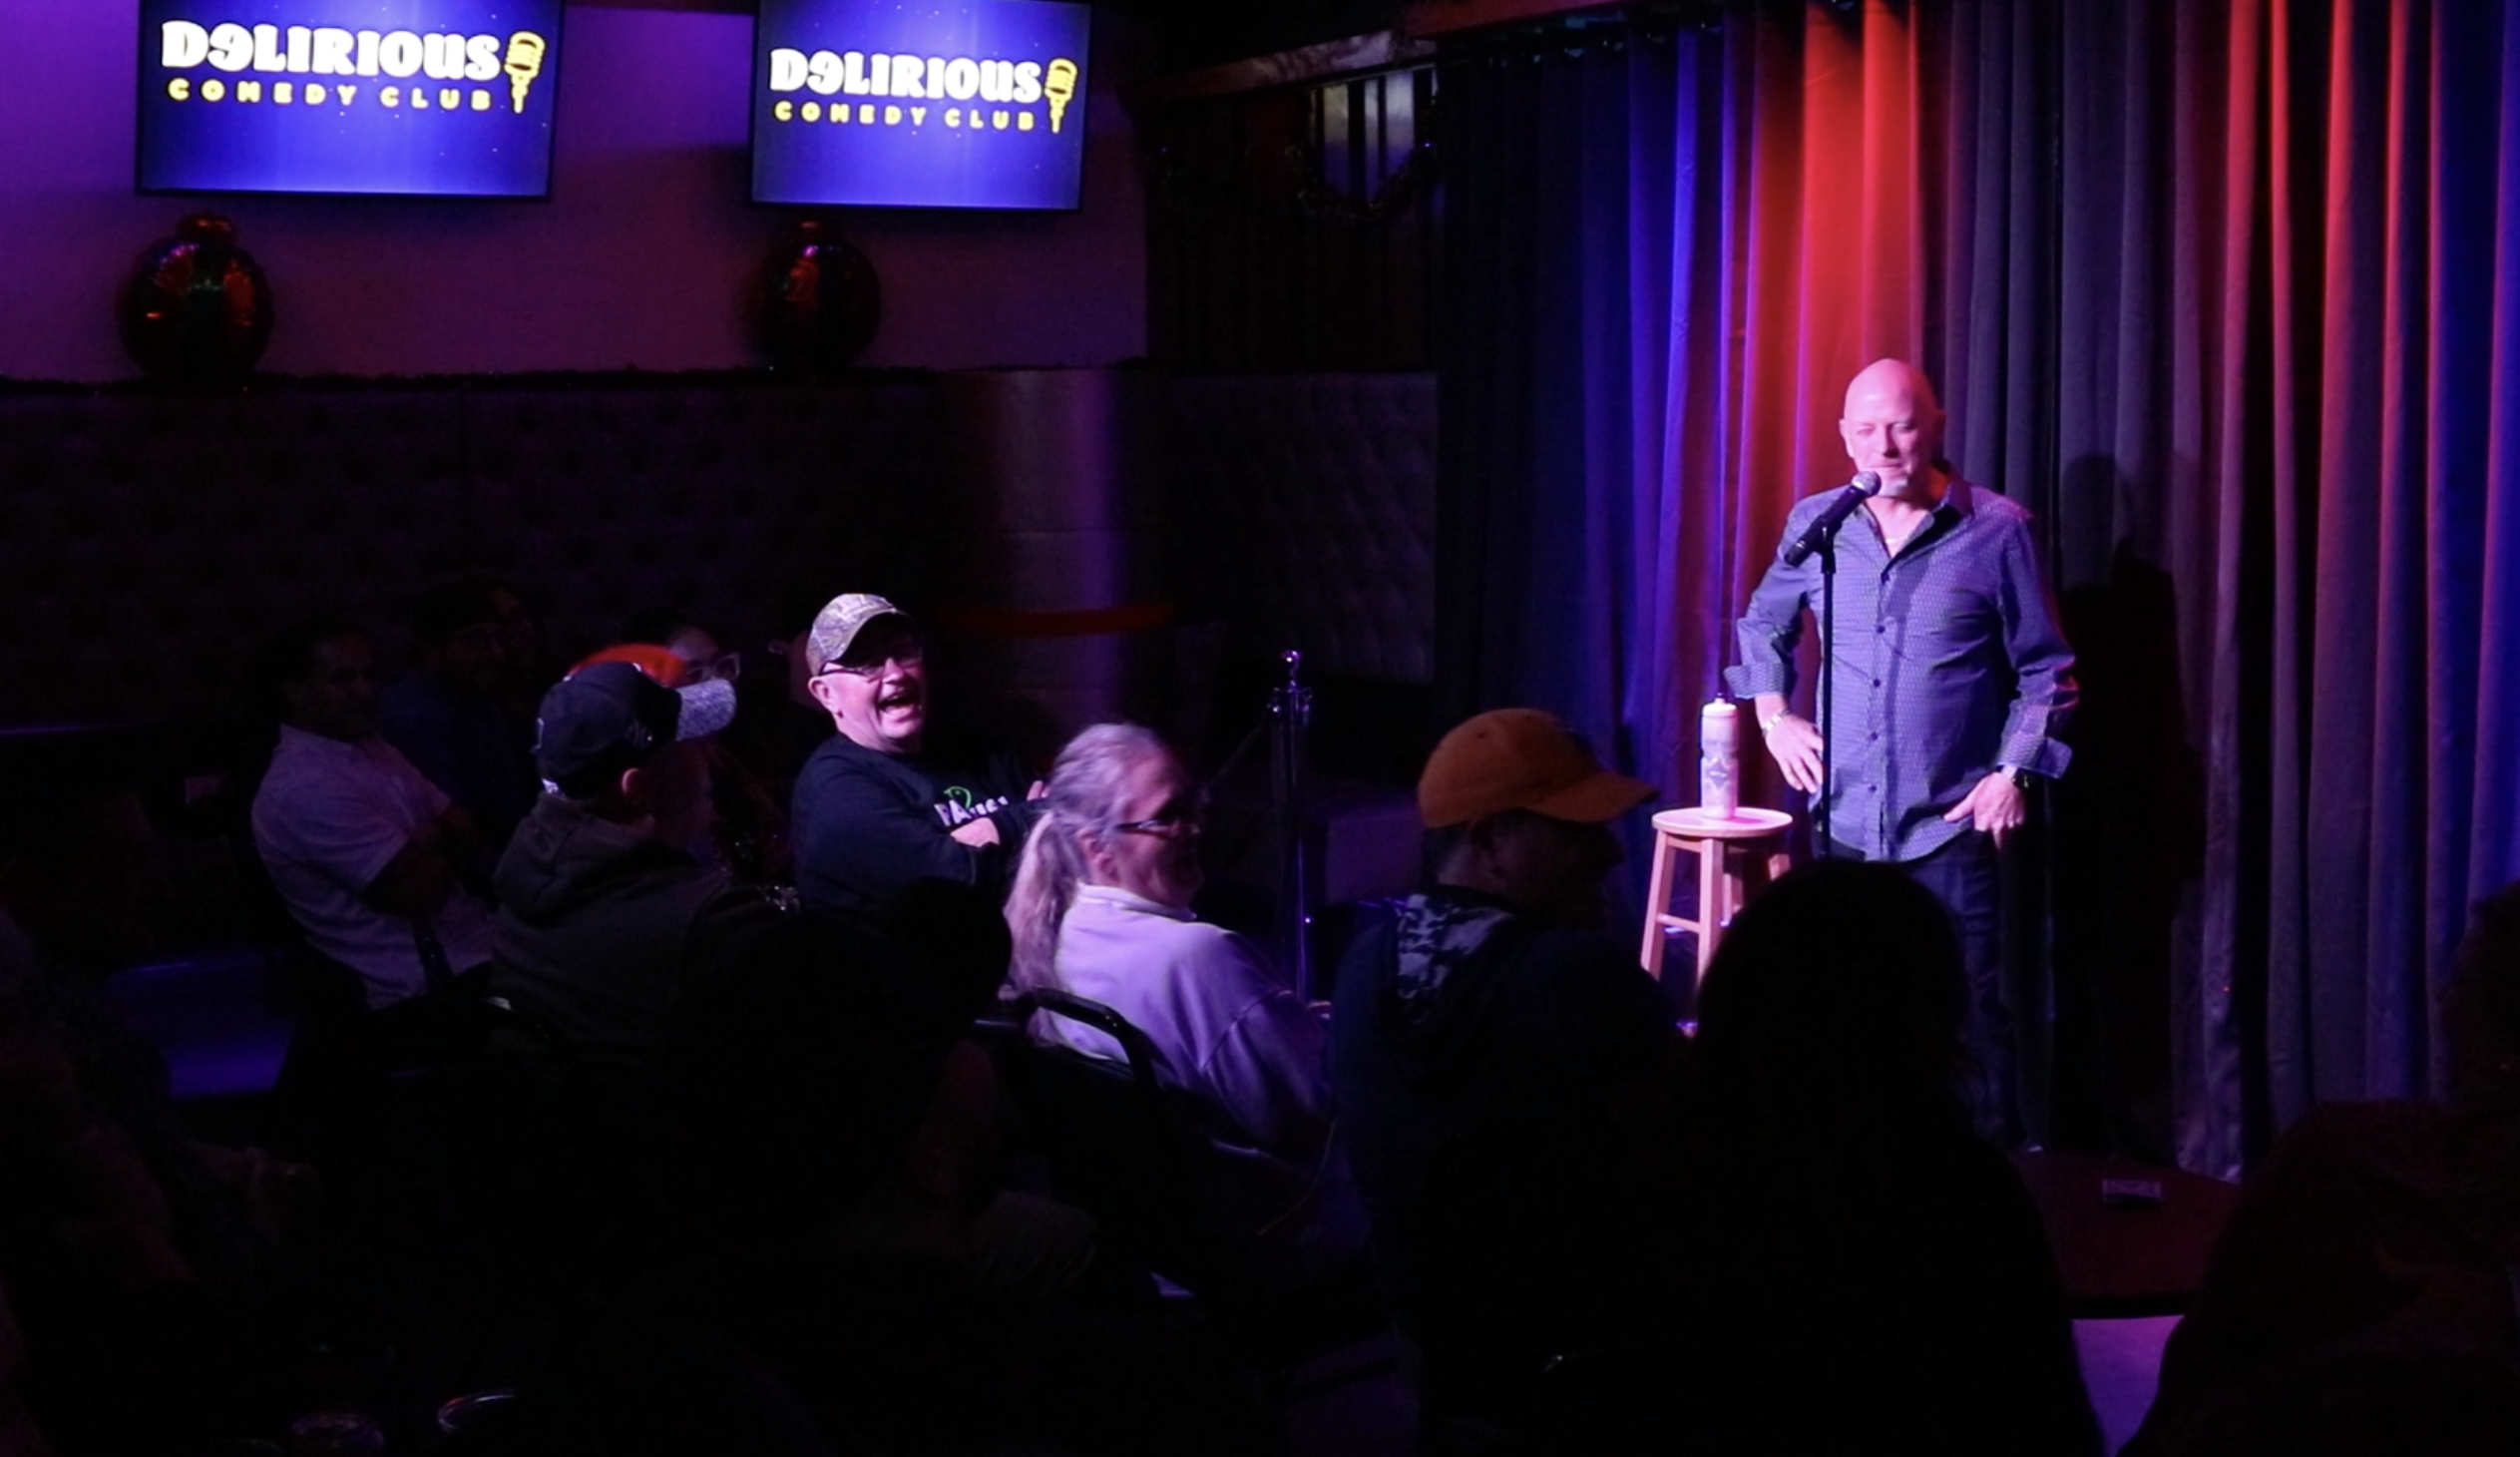 Delirious Comedy Club brings nightly laughter to new location inside Hennessy''''s Showroom on Fremont St. The only full time, professional comedy club in downtown Las Vegas. 